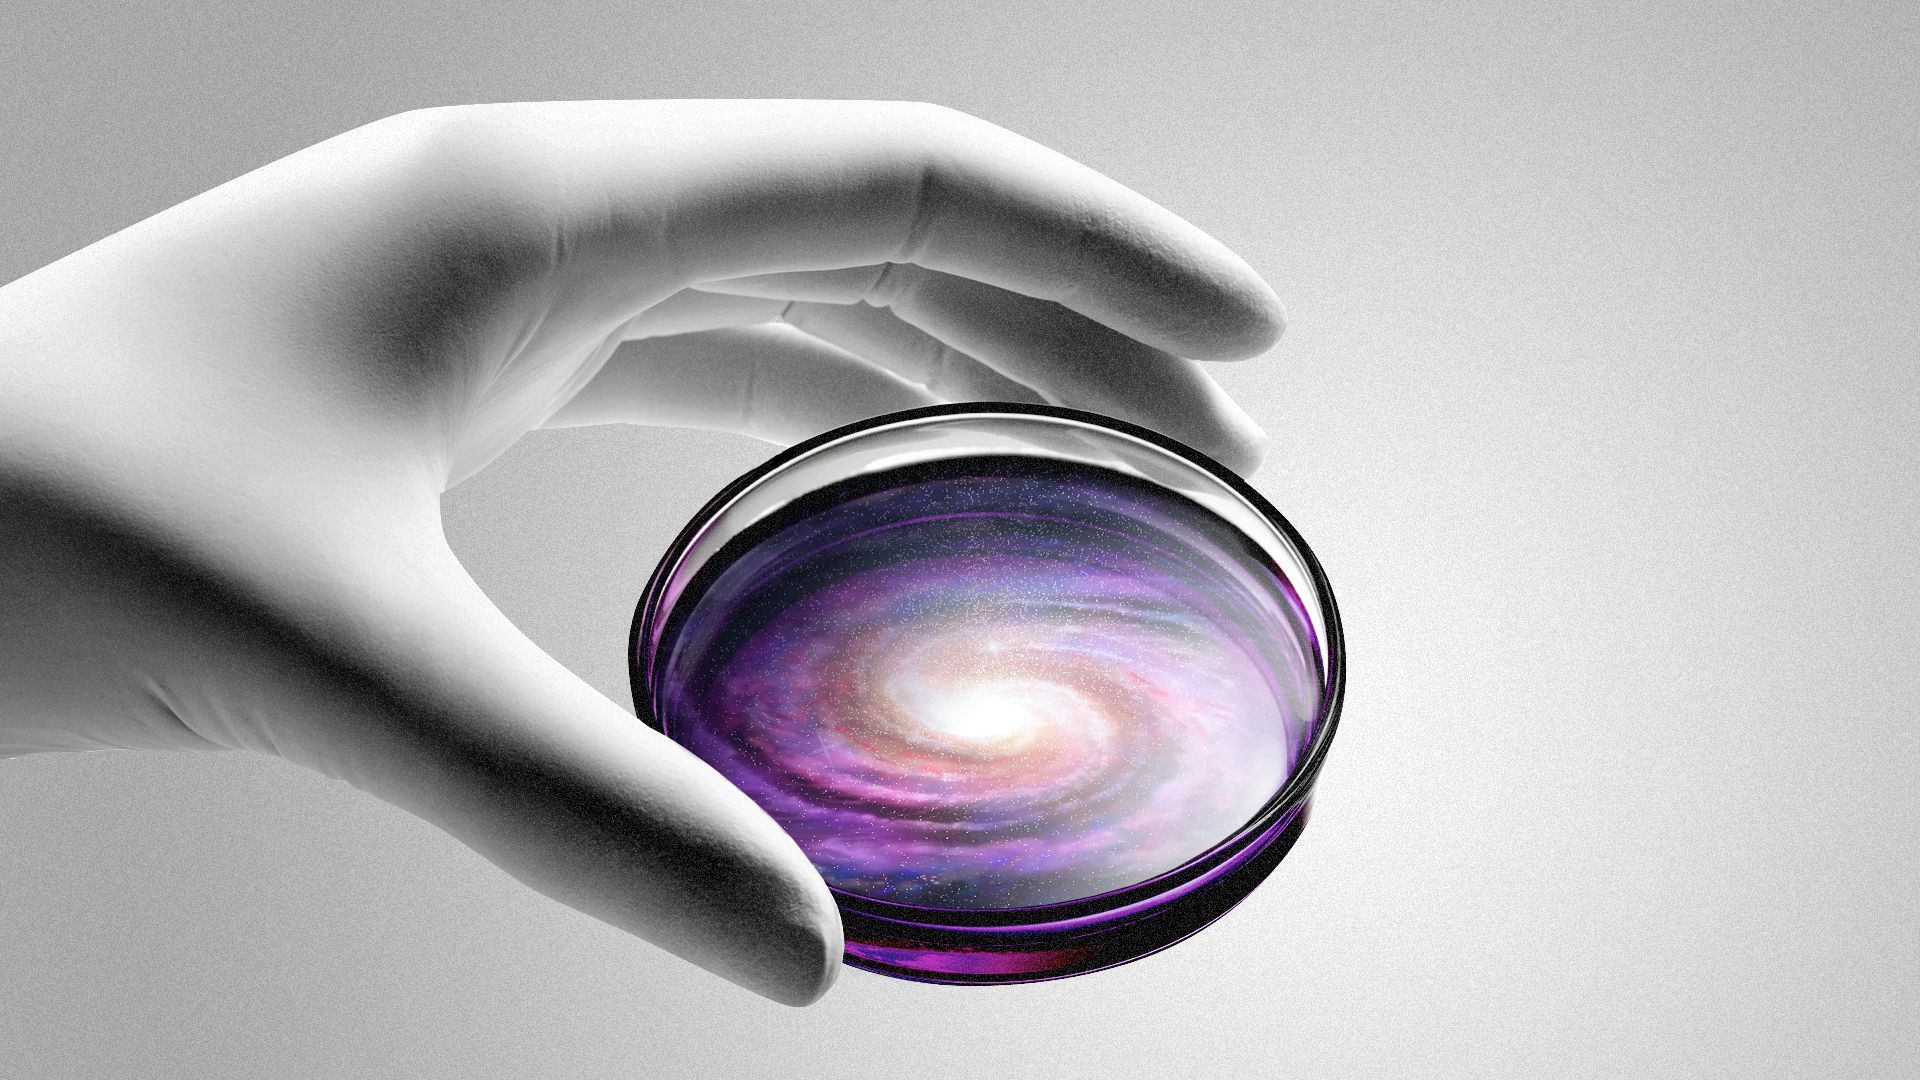 Illustration of a hand holding a petri dish that contains a galaxy.